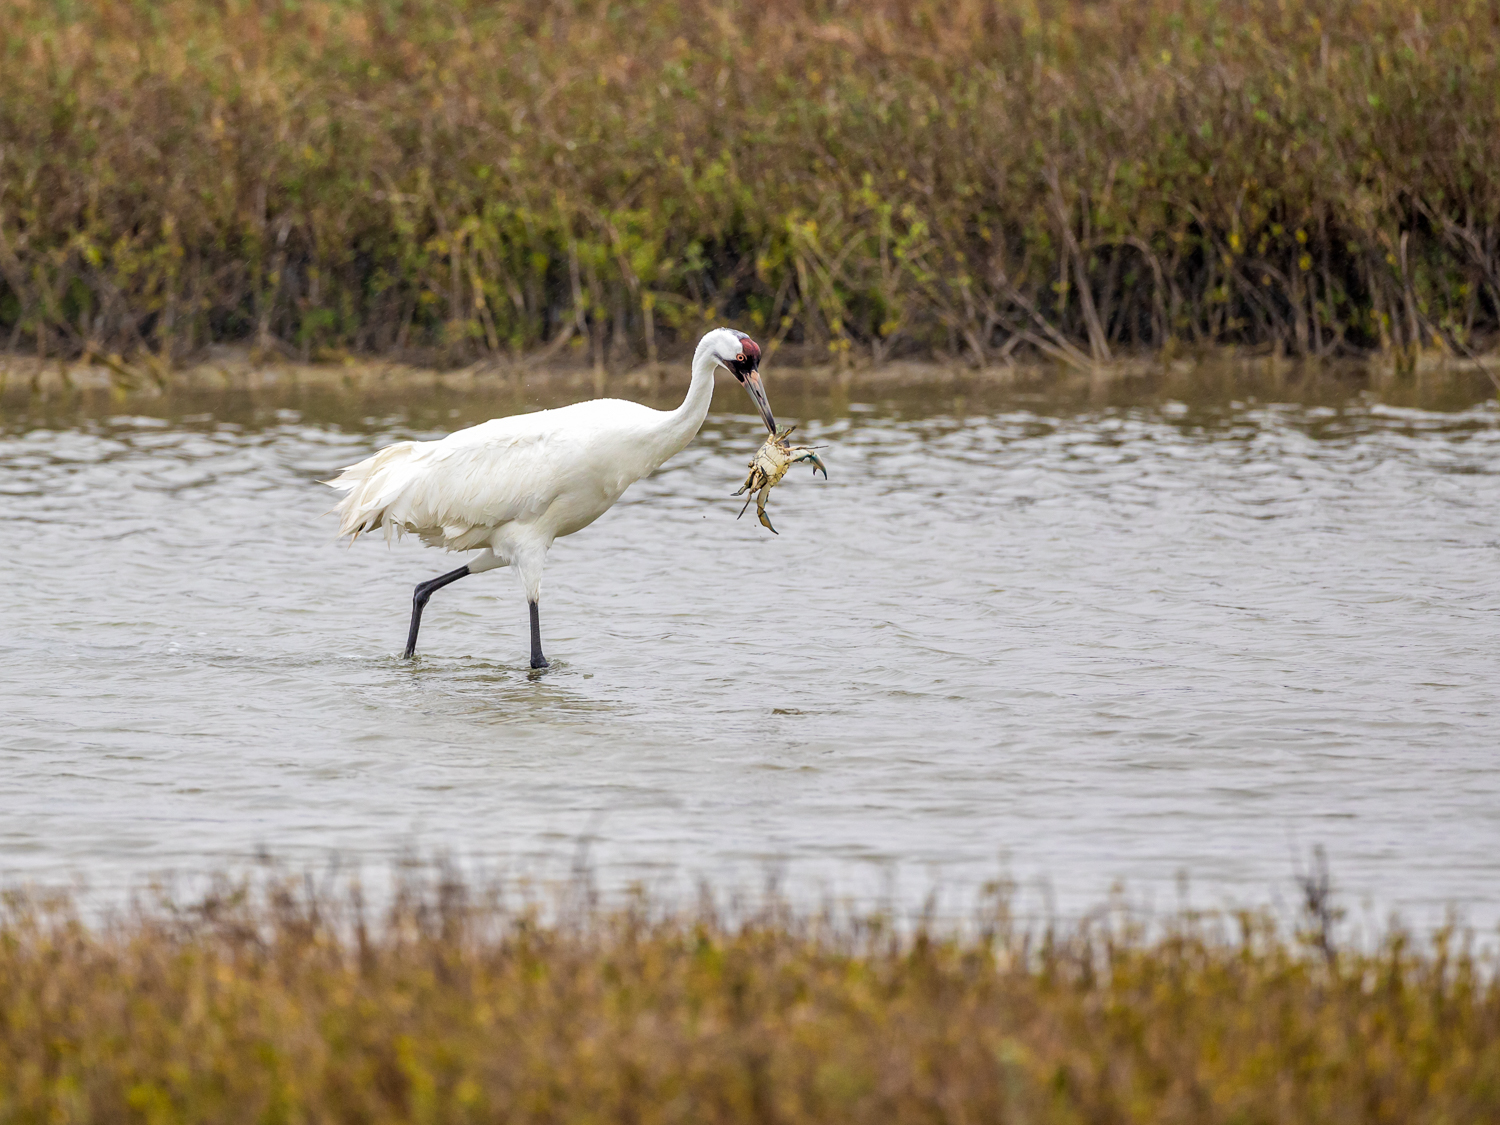 Whooping Crane with a Crab